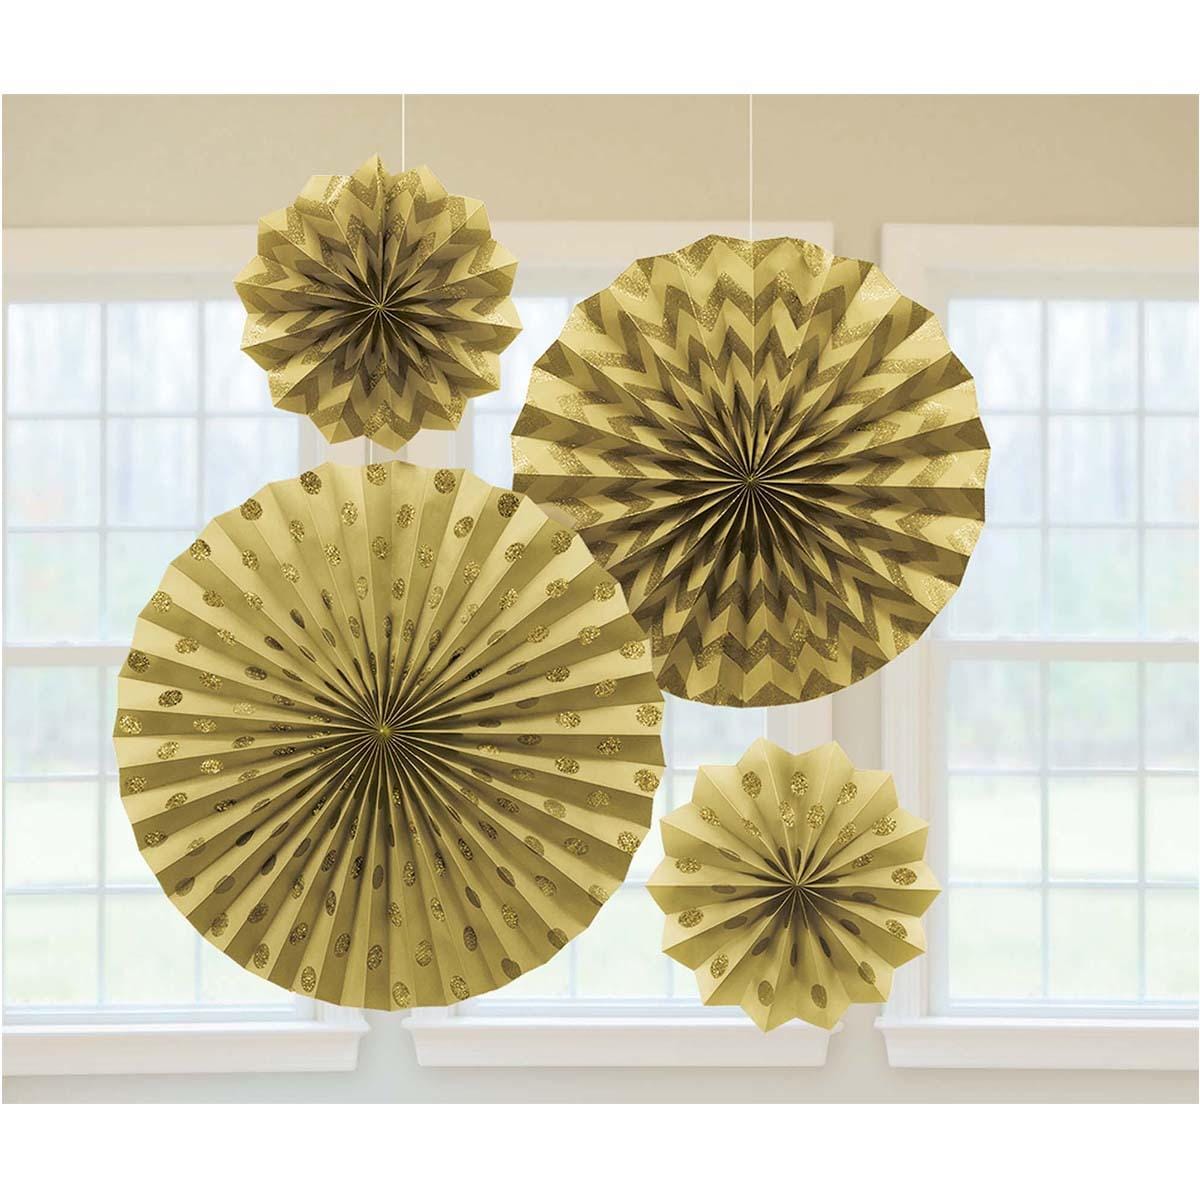 Buy Decorations Glitter Paper Fans - Gold 4/pkg. sold at Party Expert